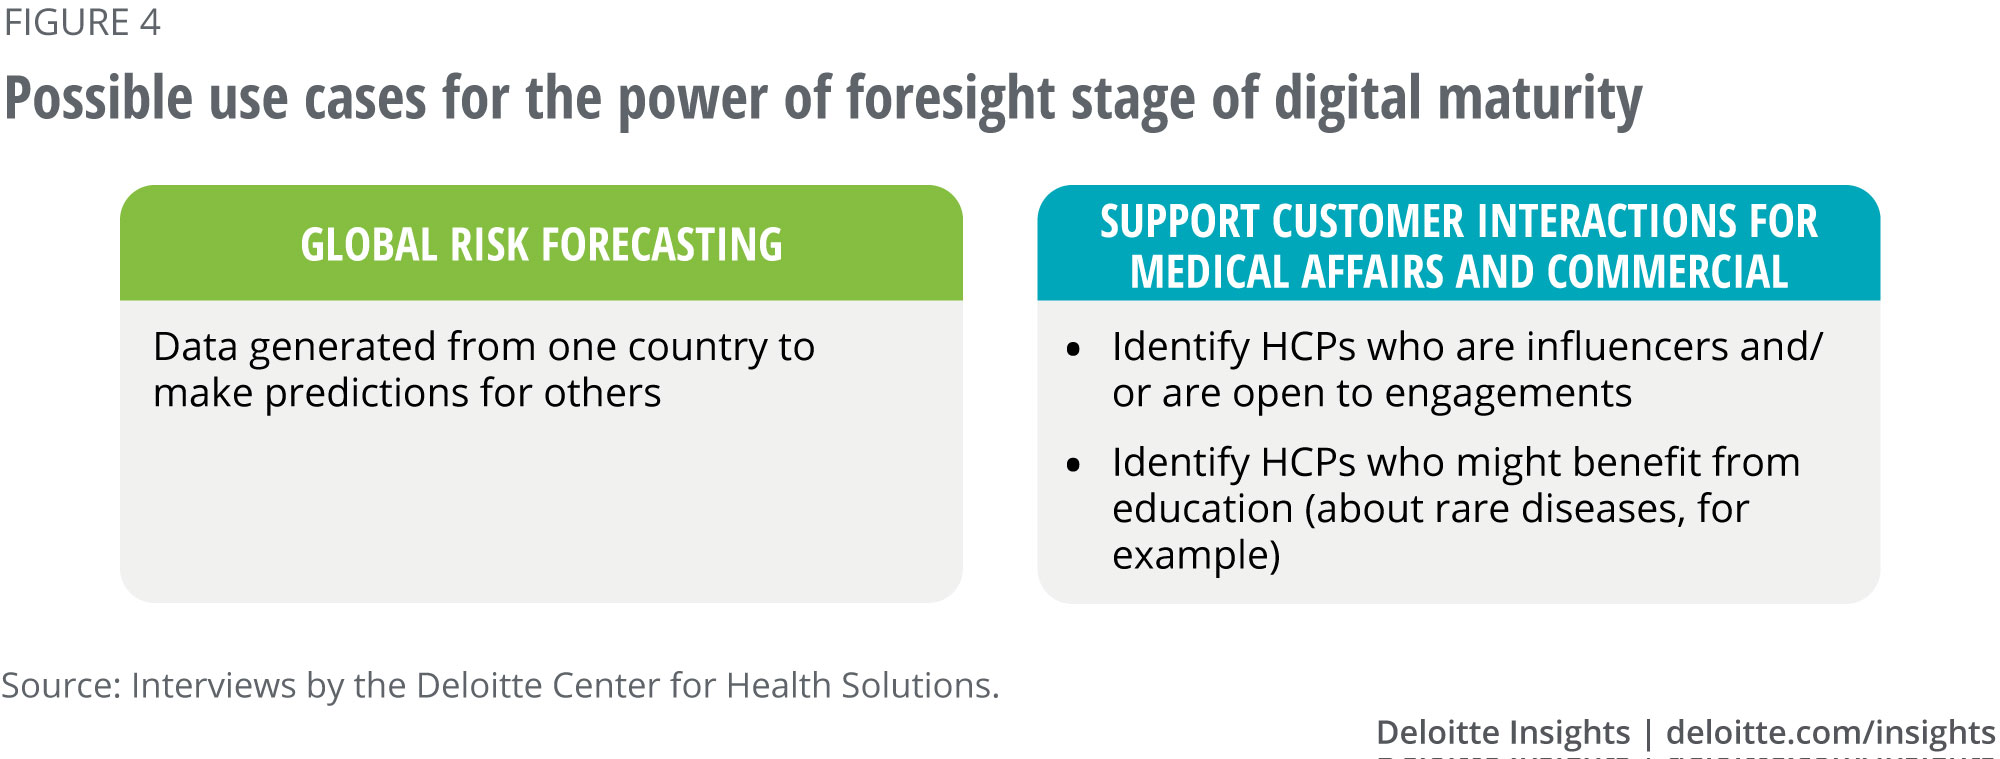 Possible use cases for the power of foresight stage of digital maturity